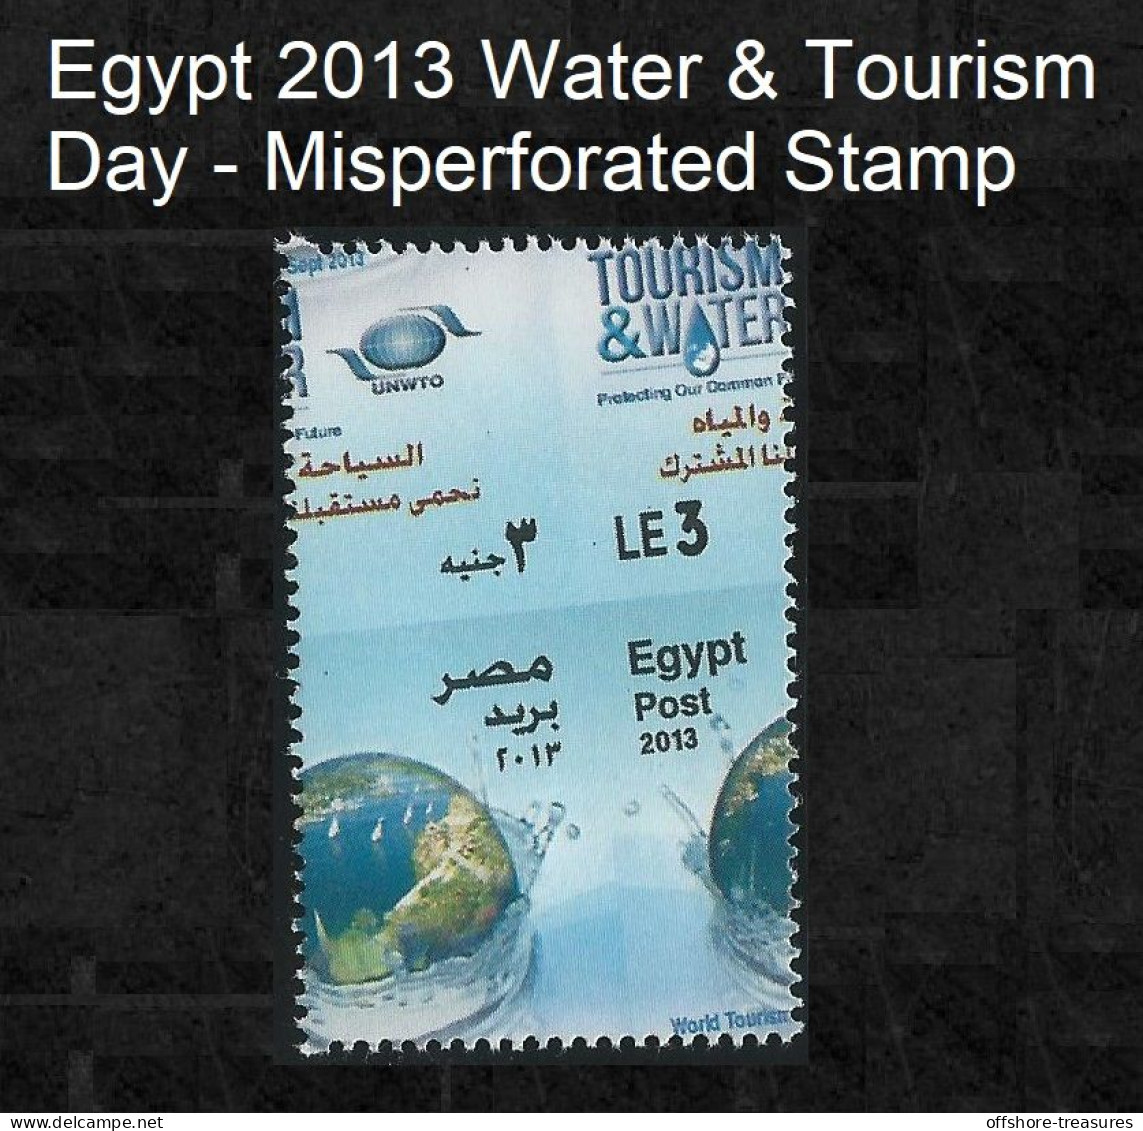 EGYPT Stamps 2013 UN WTO - Water & Tourism Day Irregular Perforation Misperforated Stamp - Misperf Seldom Sold MNH - Ongebruikt